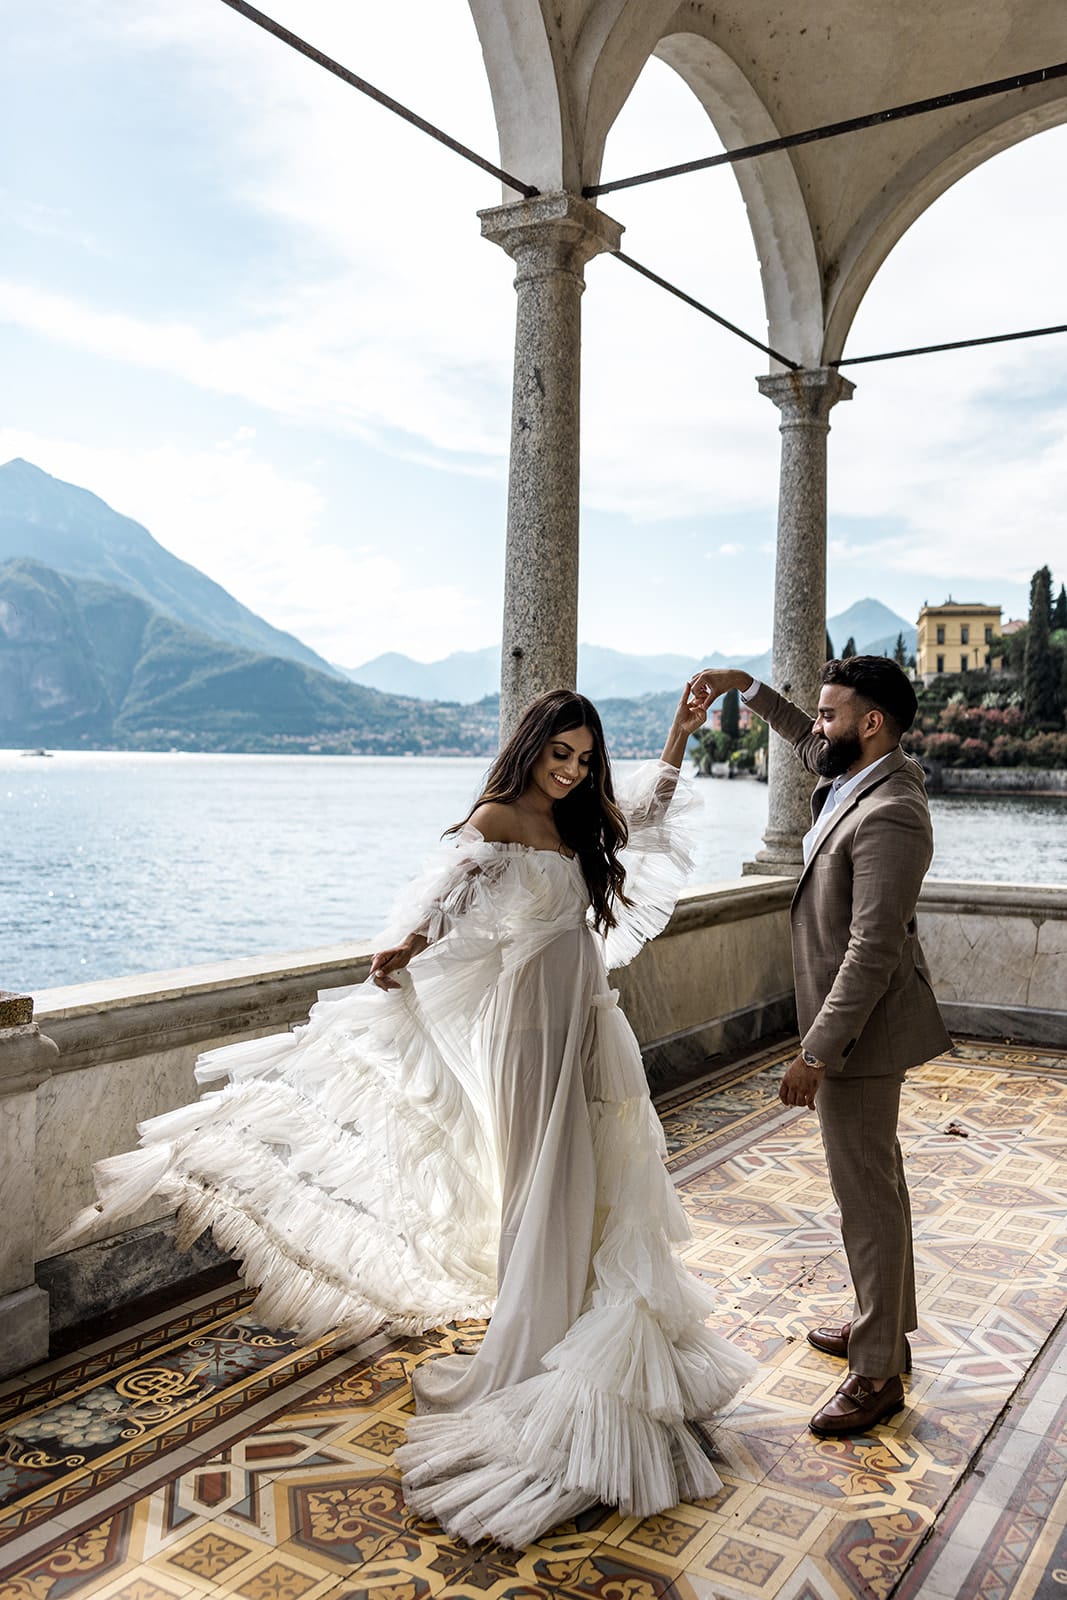 Man twirls woman with view of Lake Como in background